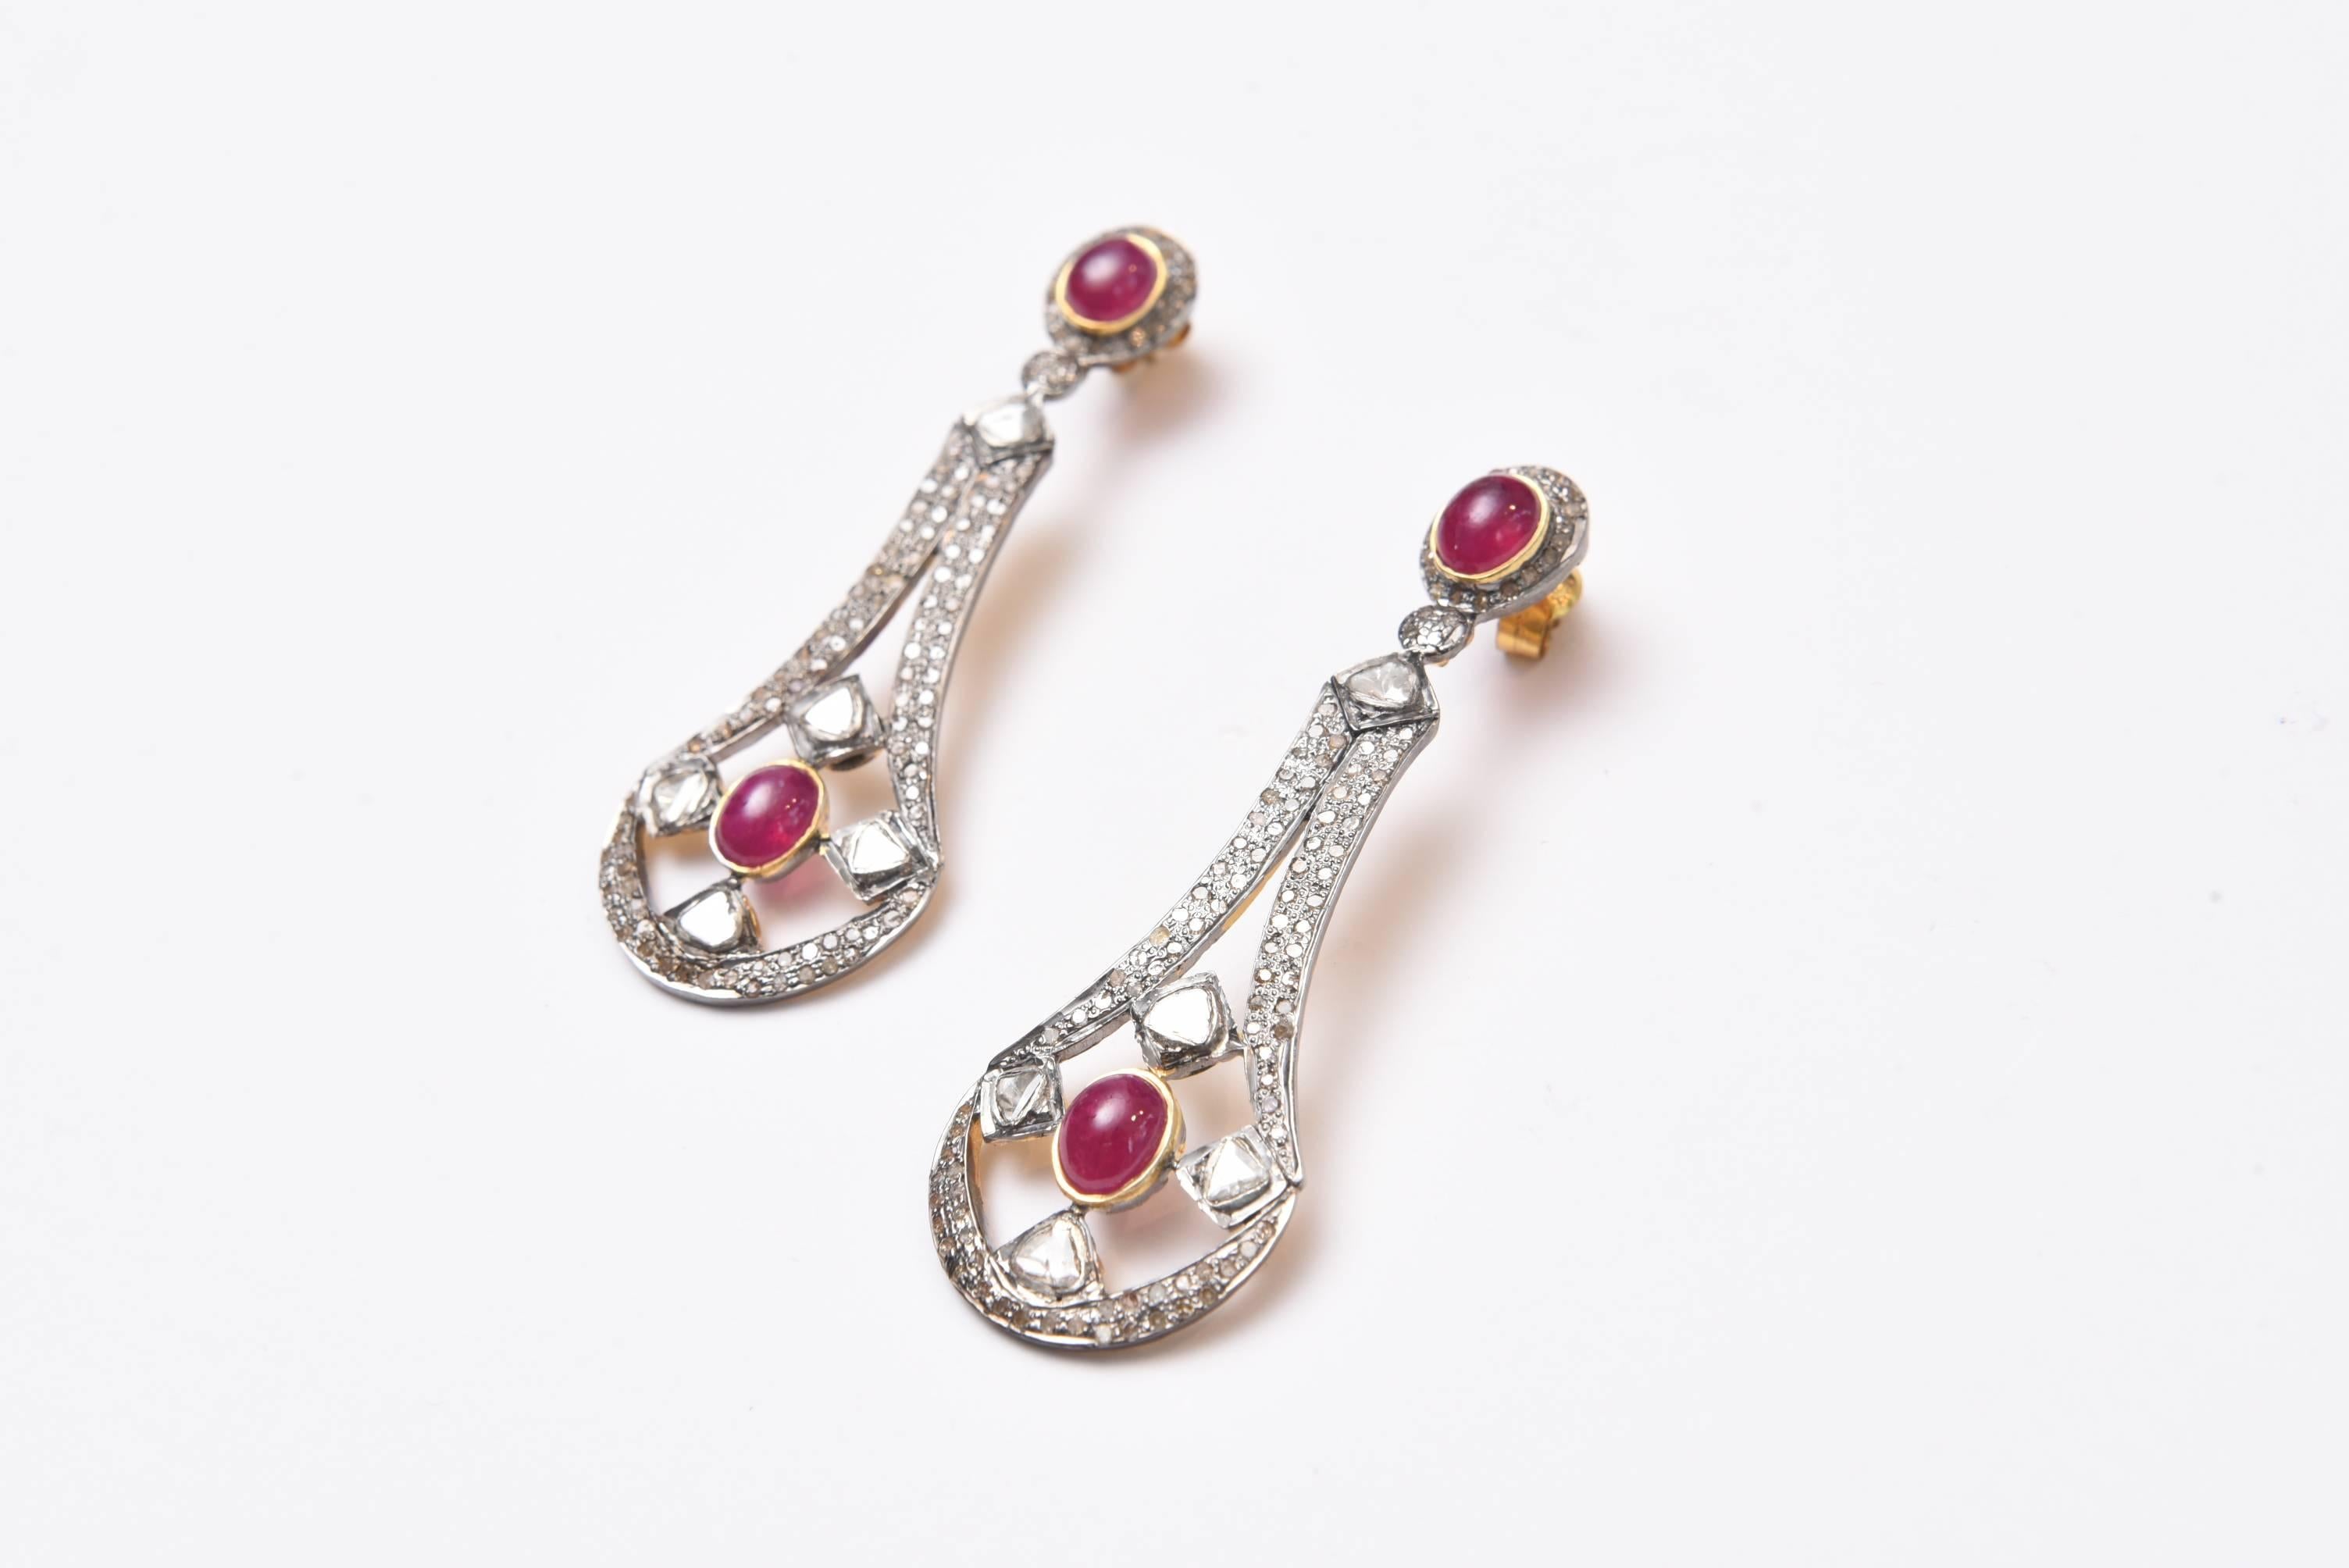 Fantastic pair of drop earrings featuring large cabochon rubies set with rosecut and pave` set diamonds in sterling with 18K gold post.  Carat weight of rubies is 8.4 and diamonds are 2.35 carats.  For pierced ears.